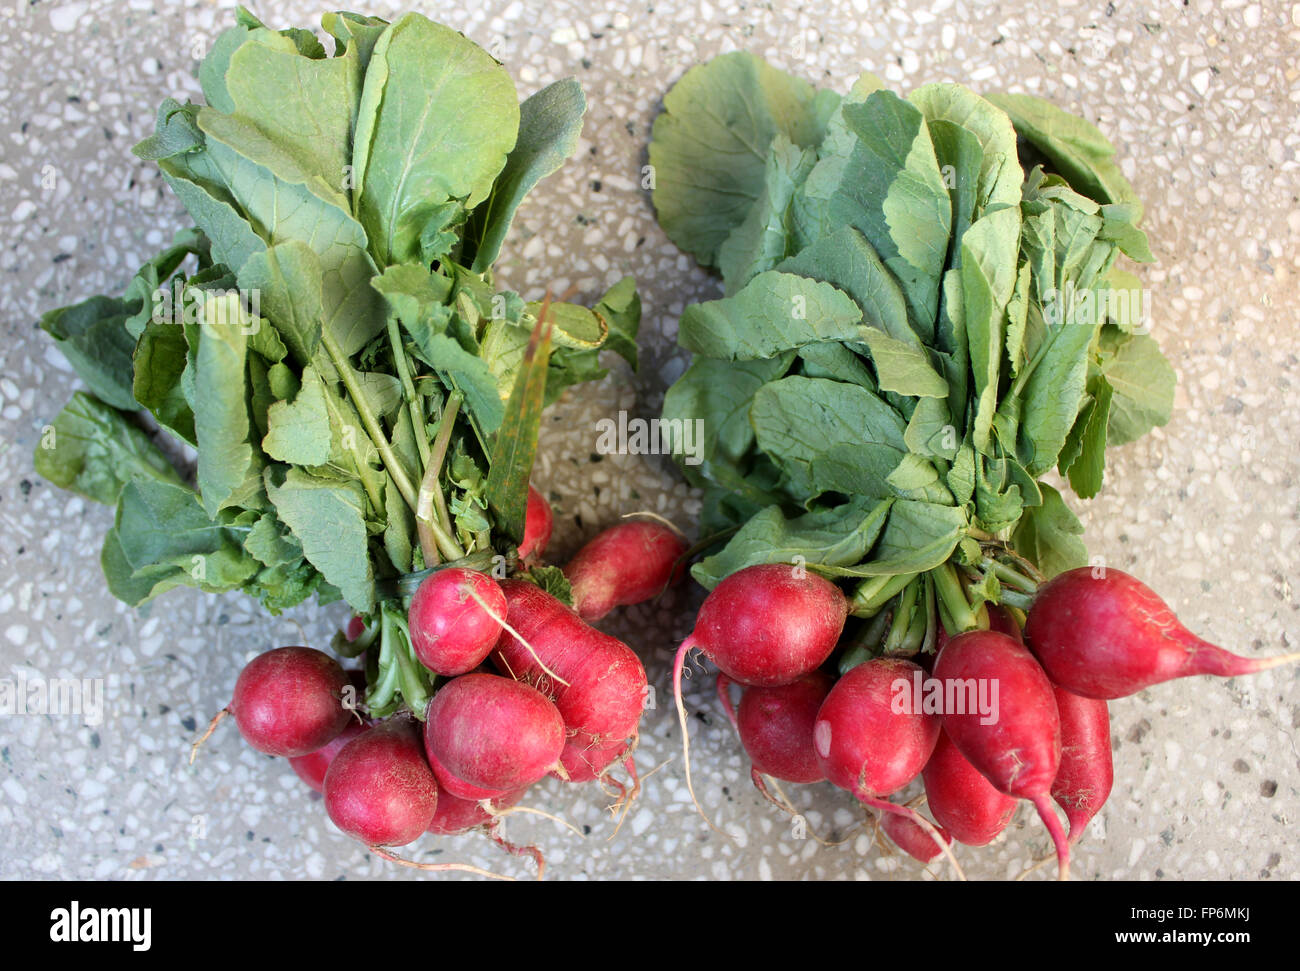 Red English Radish, Raphanus sativus, popular salad food crop with shorter leaves with few lobes, and small globose red roots Stock Photo